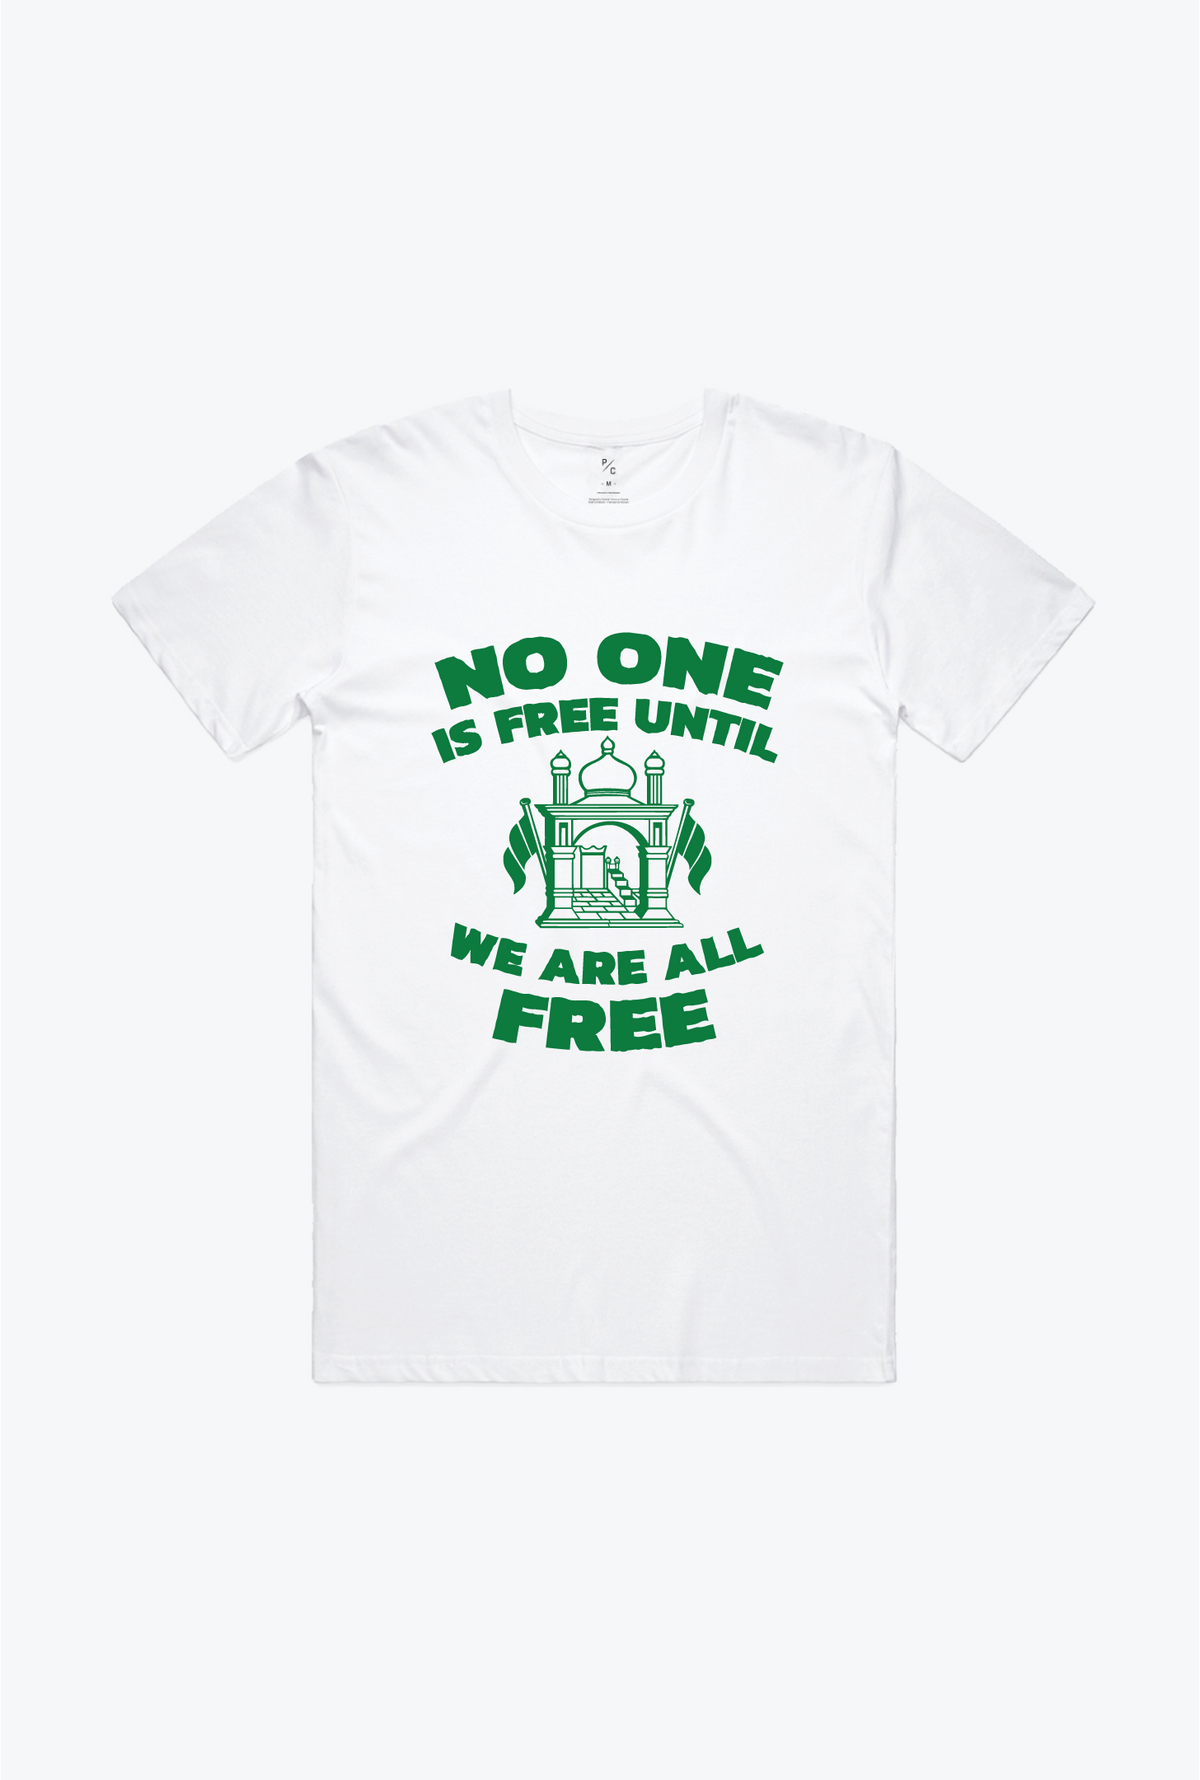 'No One is Free Until We Are All Free' Afghanistan Aid T-Shirt